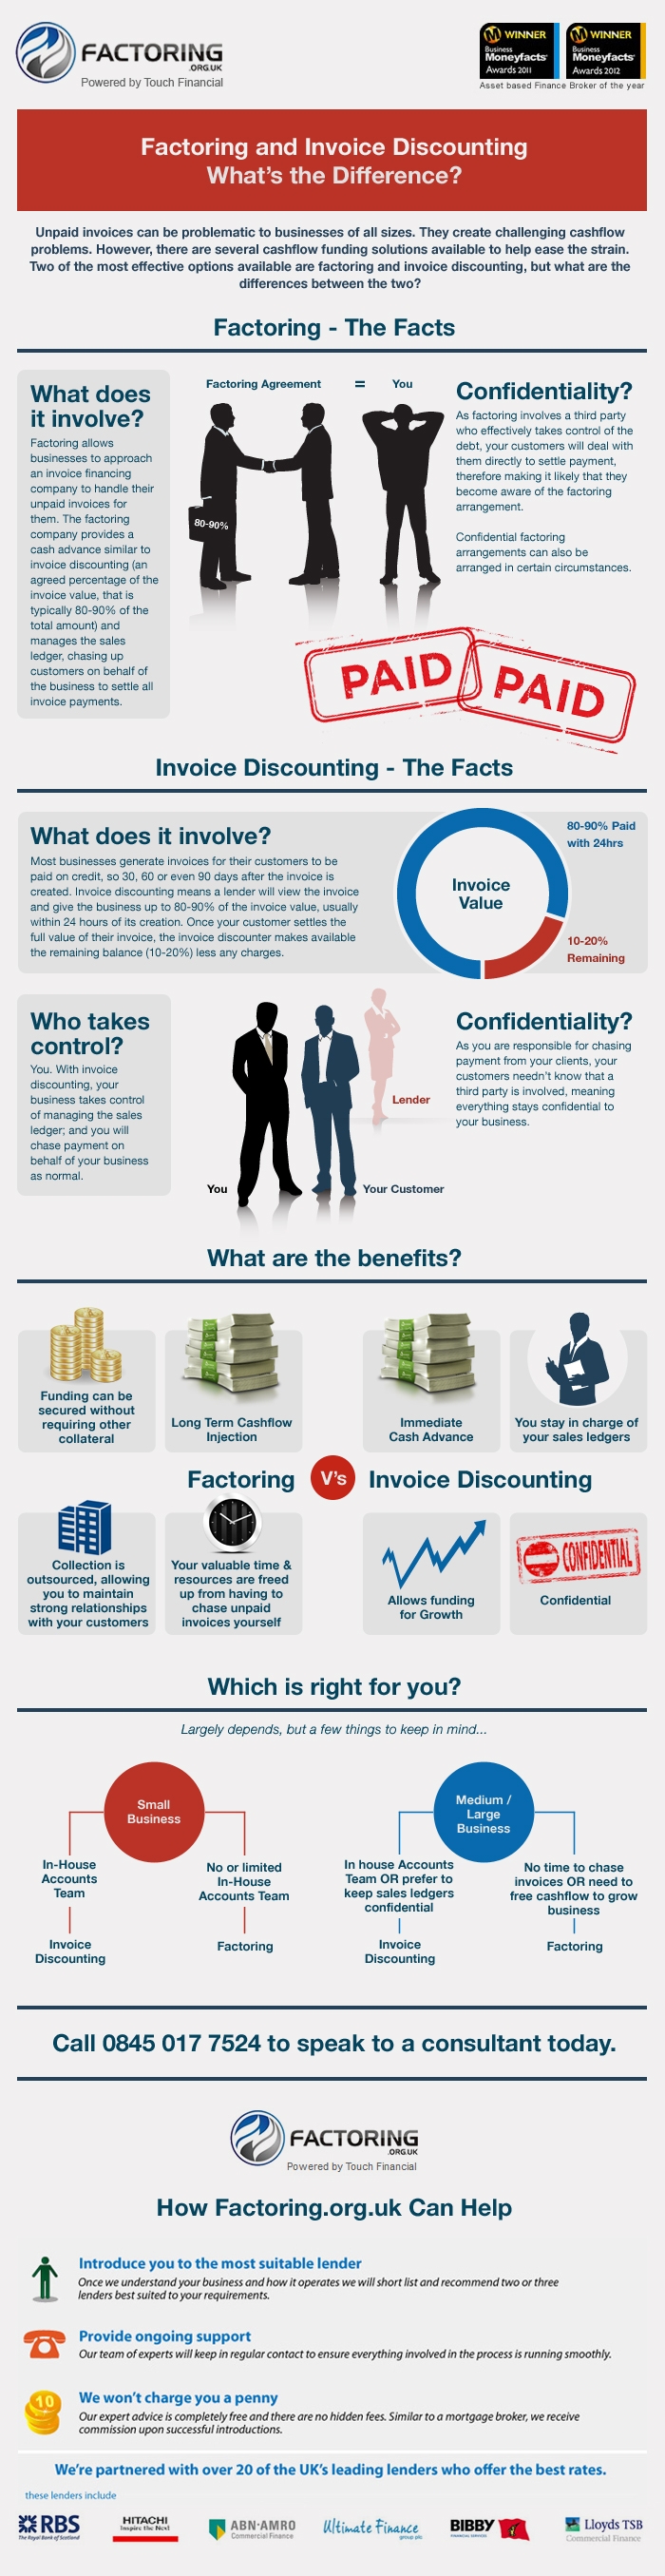 factoring and invoice discounting – which is right for you  factoring and invoice discounting